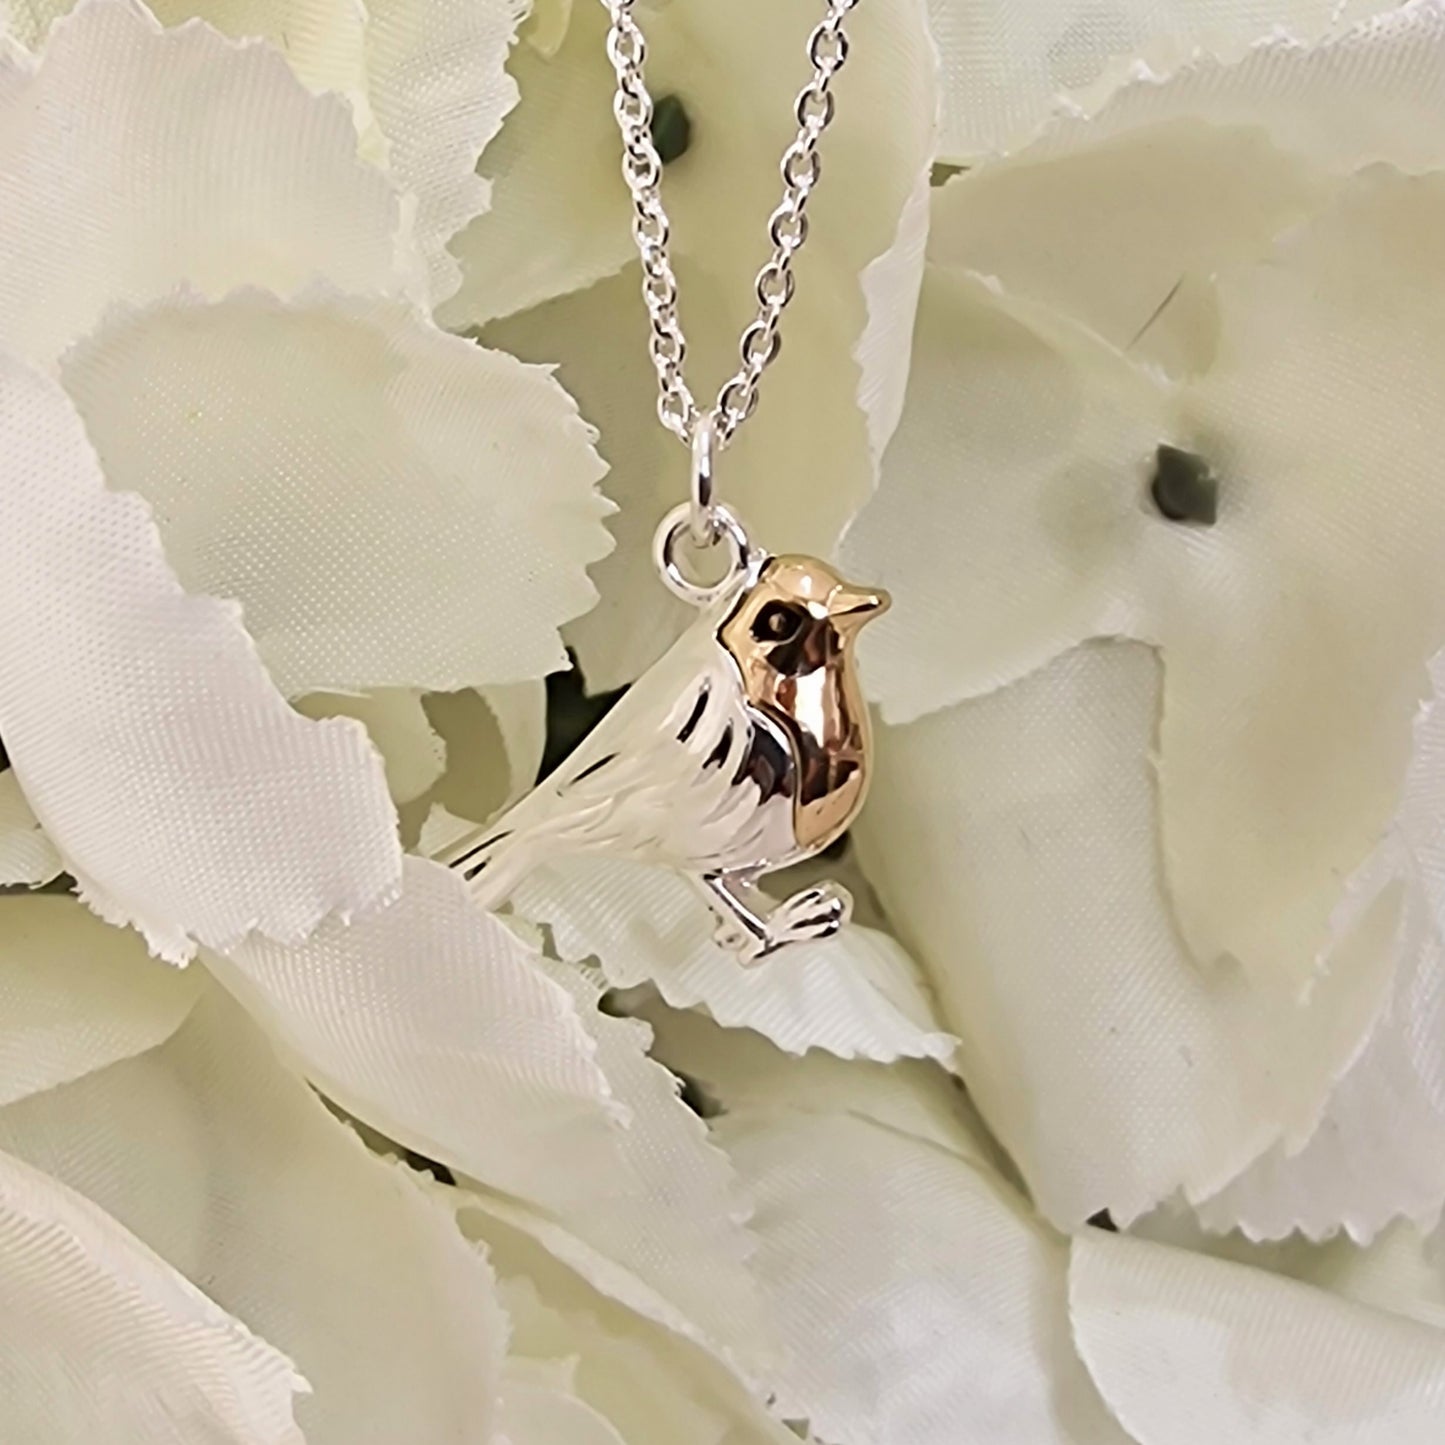 Robin Redbreast Charm Necklace Silver Gold Colour